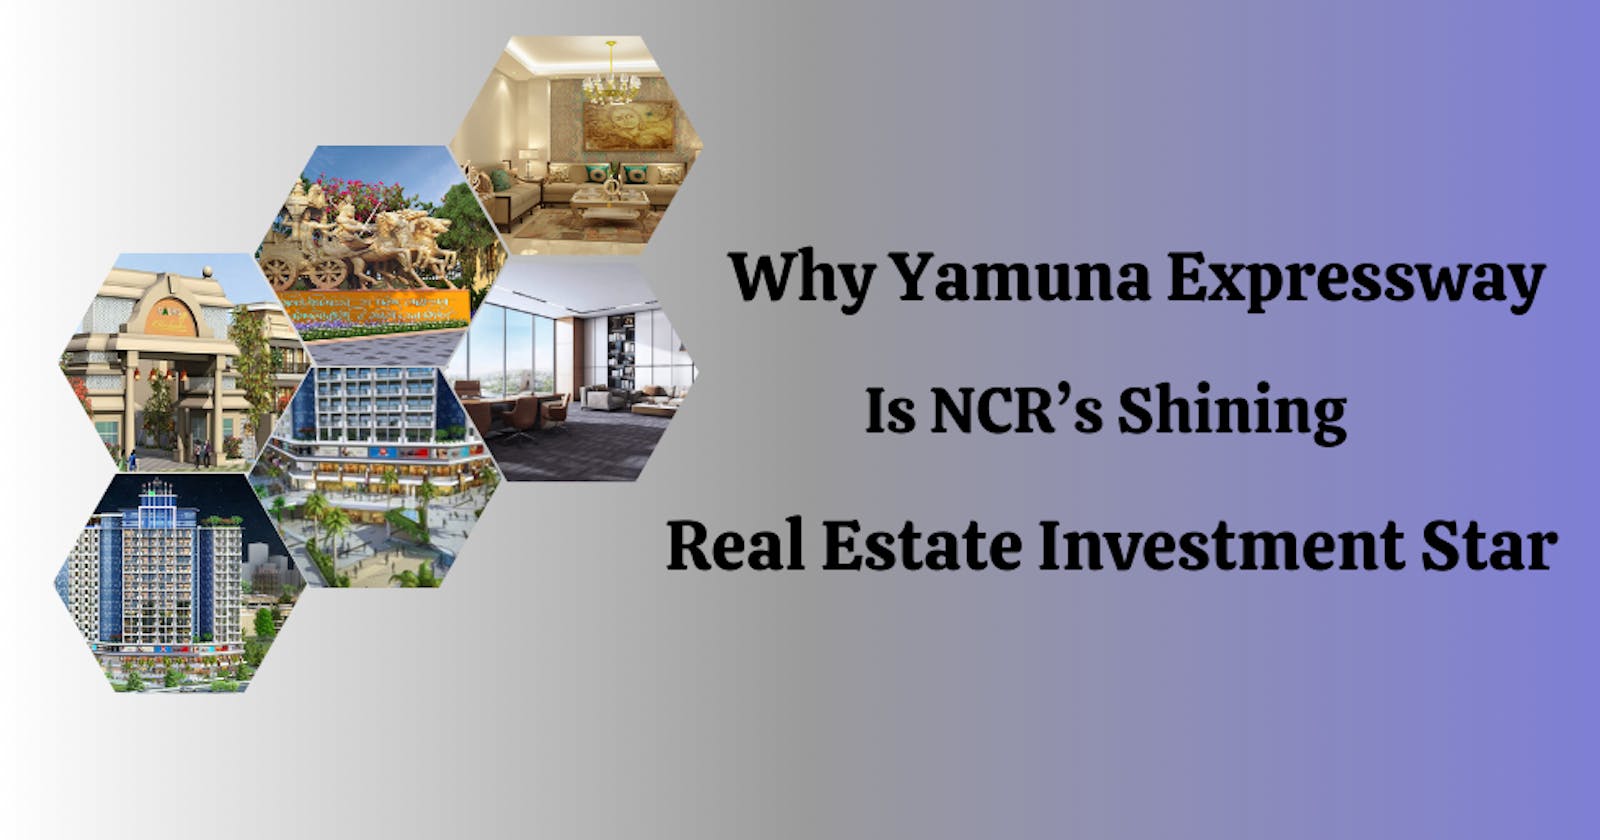 Why Yamuna Expressway Is NCR’s Shining Real Estate Investment Star